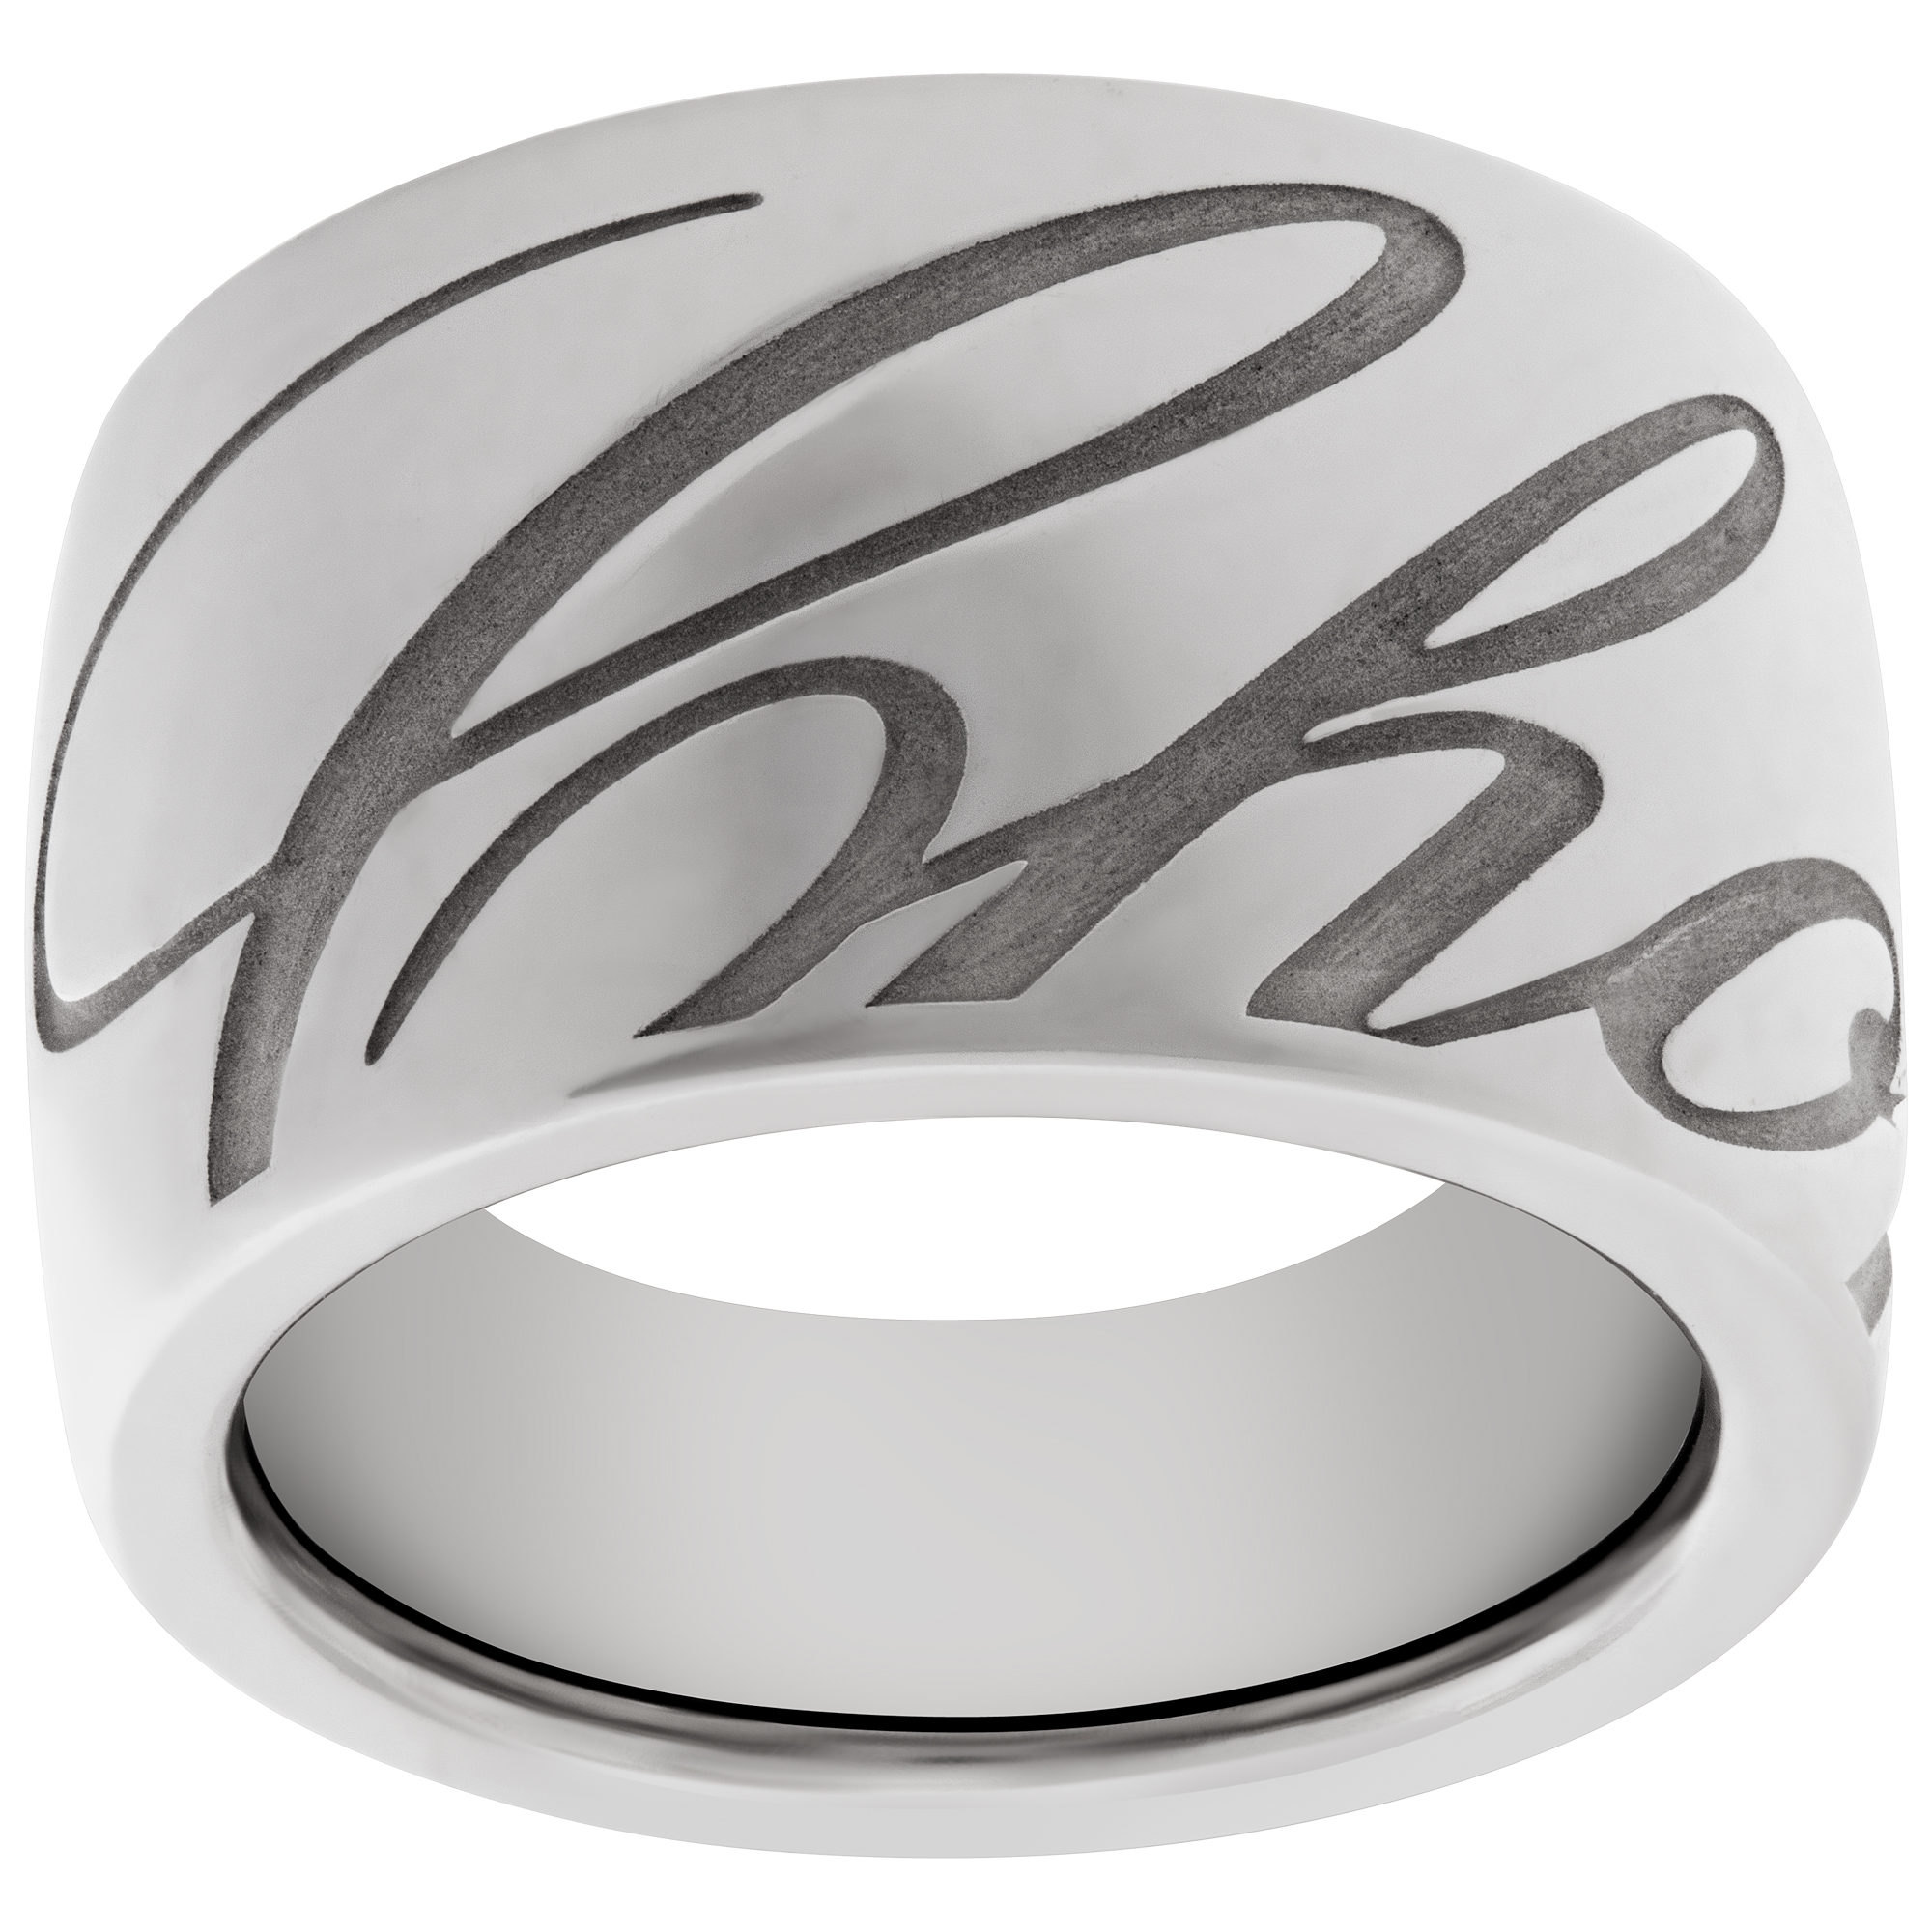 Chopard Chopardissimo ring in 18k white gold image 1